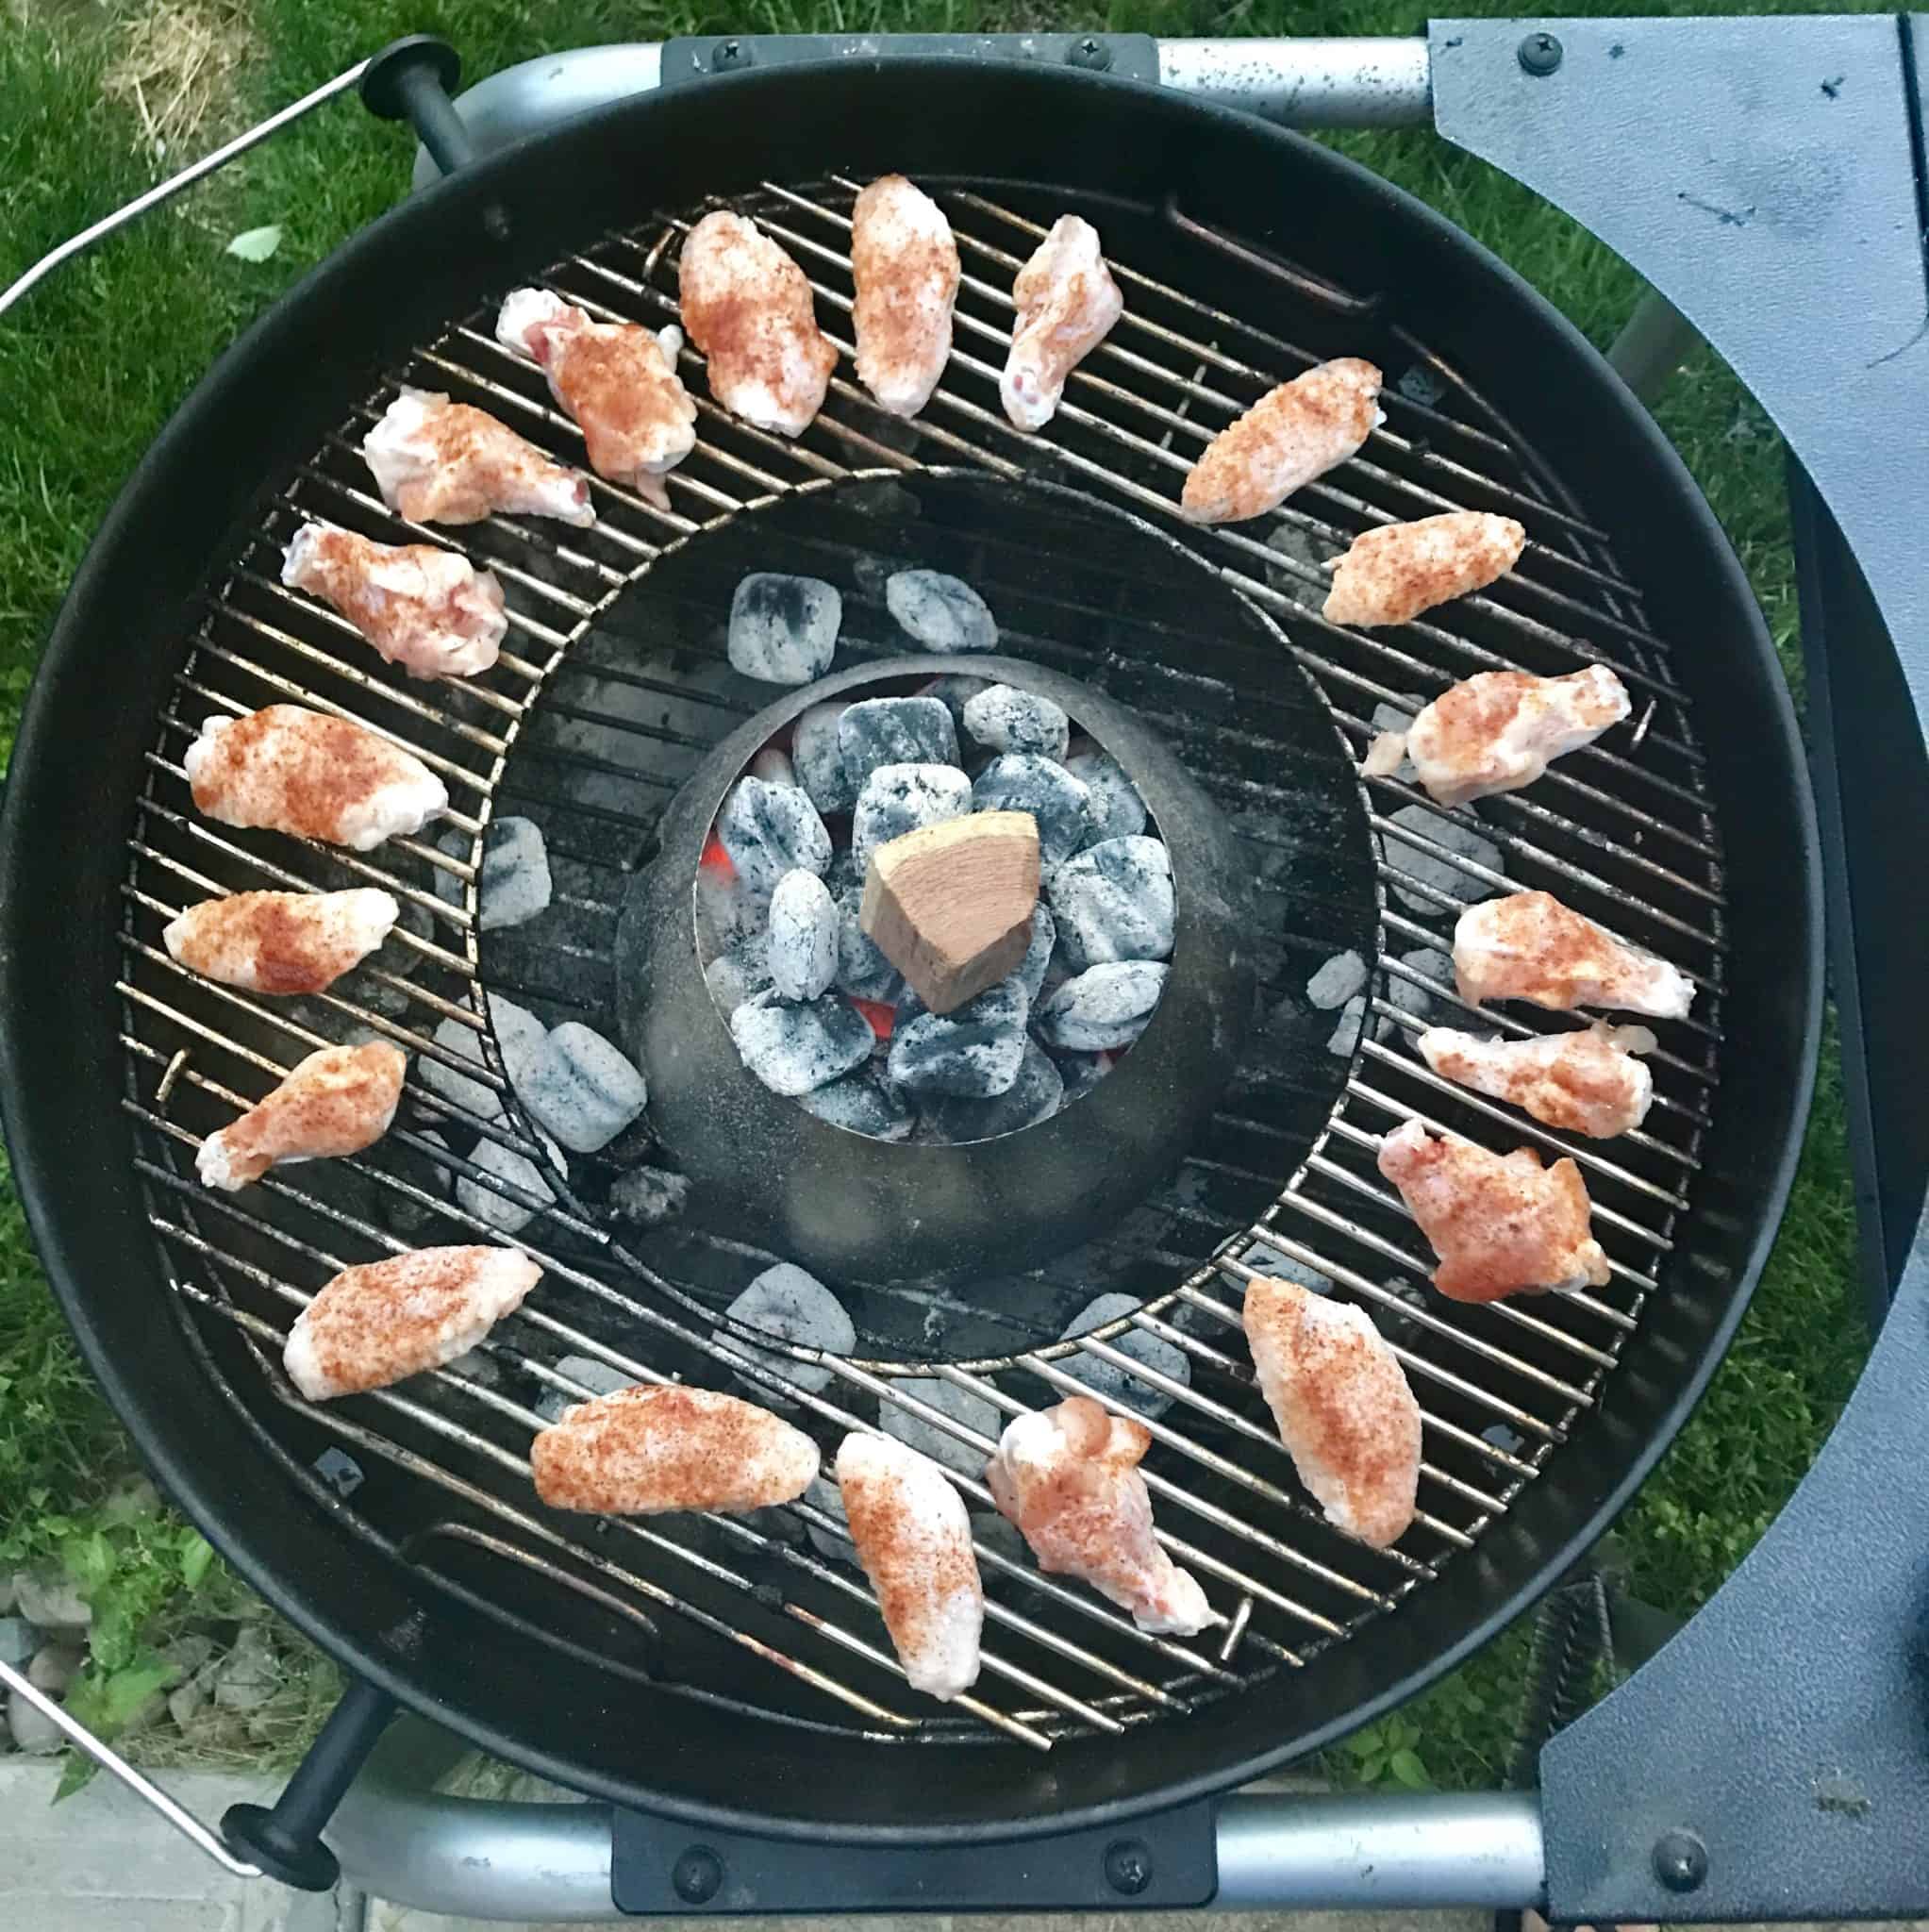 Chicken wings on weber grill with vortex in center overhead shot